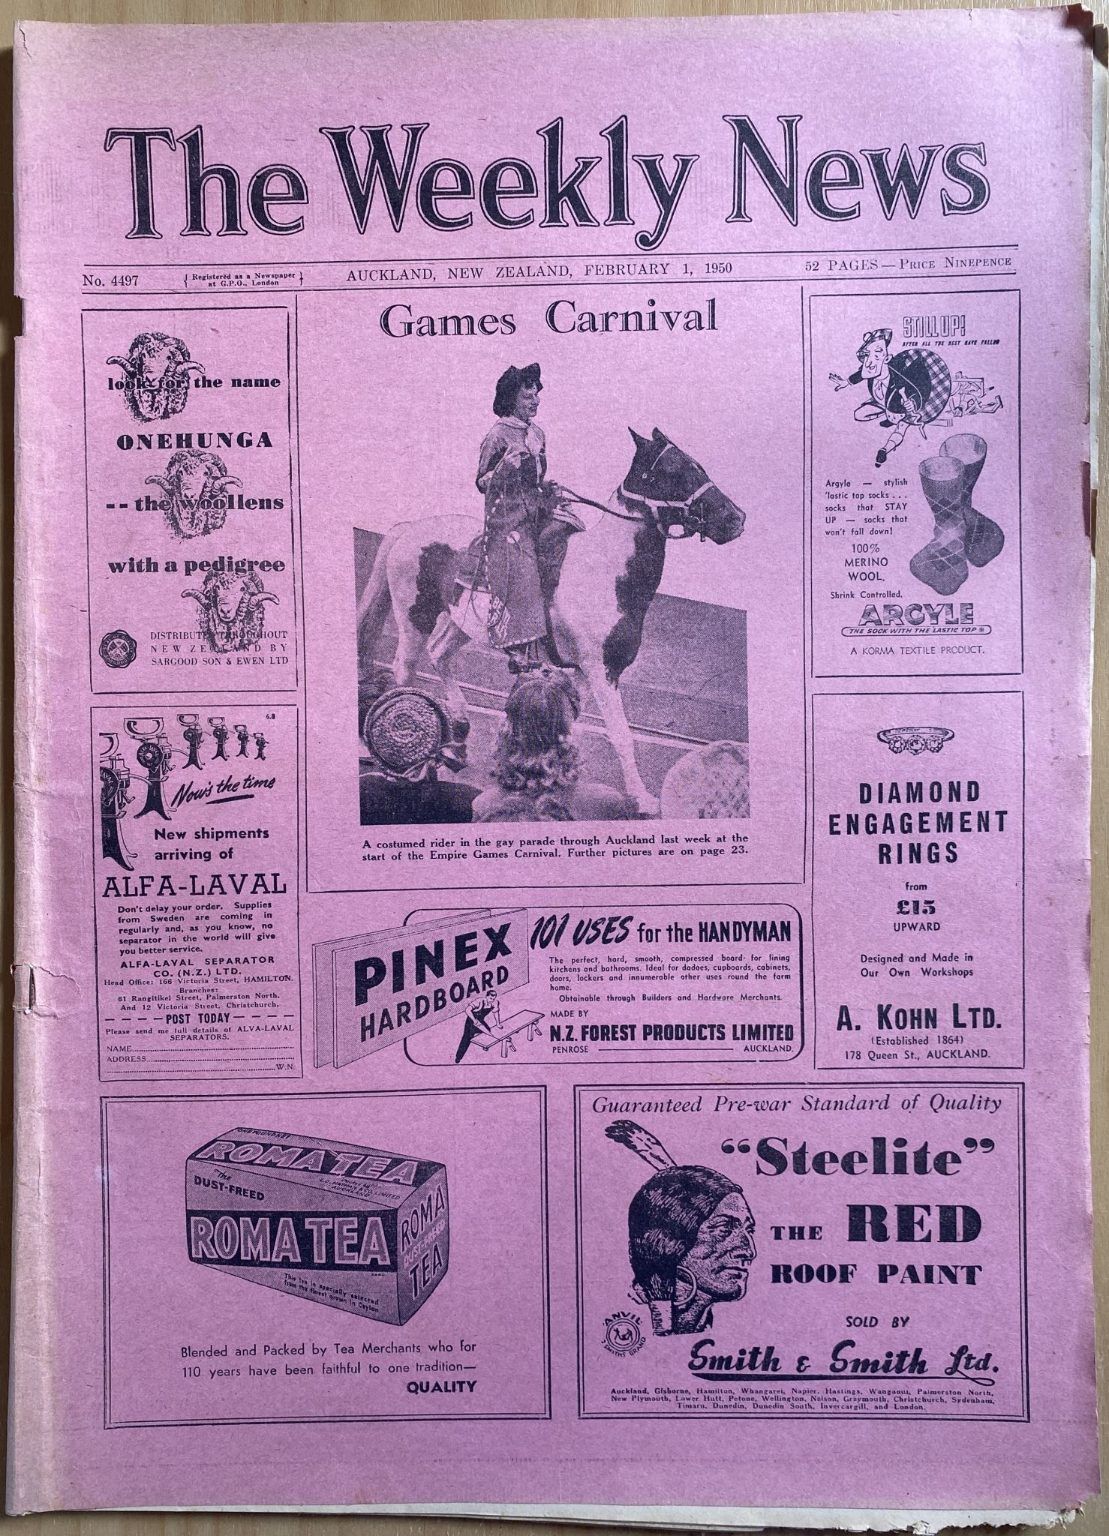 OLD NEWSPAPER: The Weekly News, No. 4497, 1 February 1950